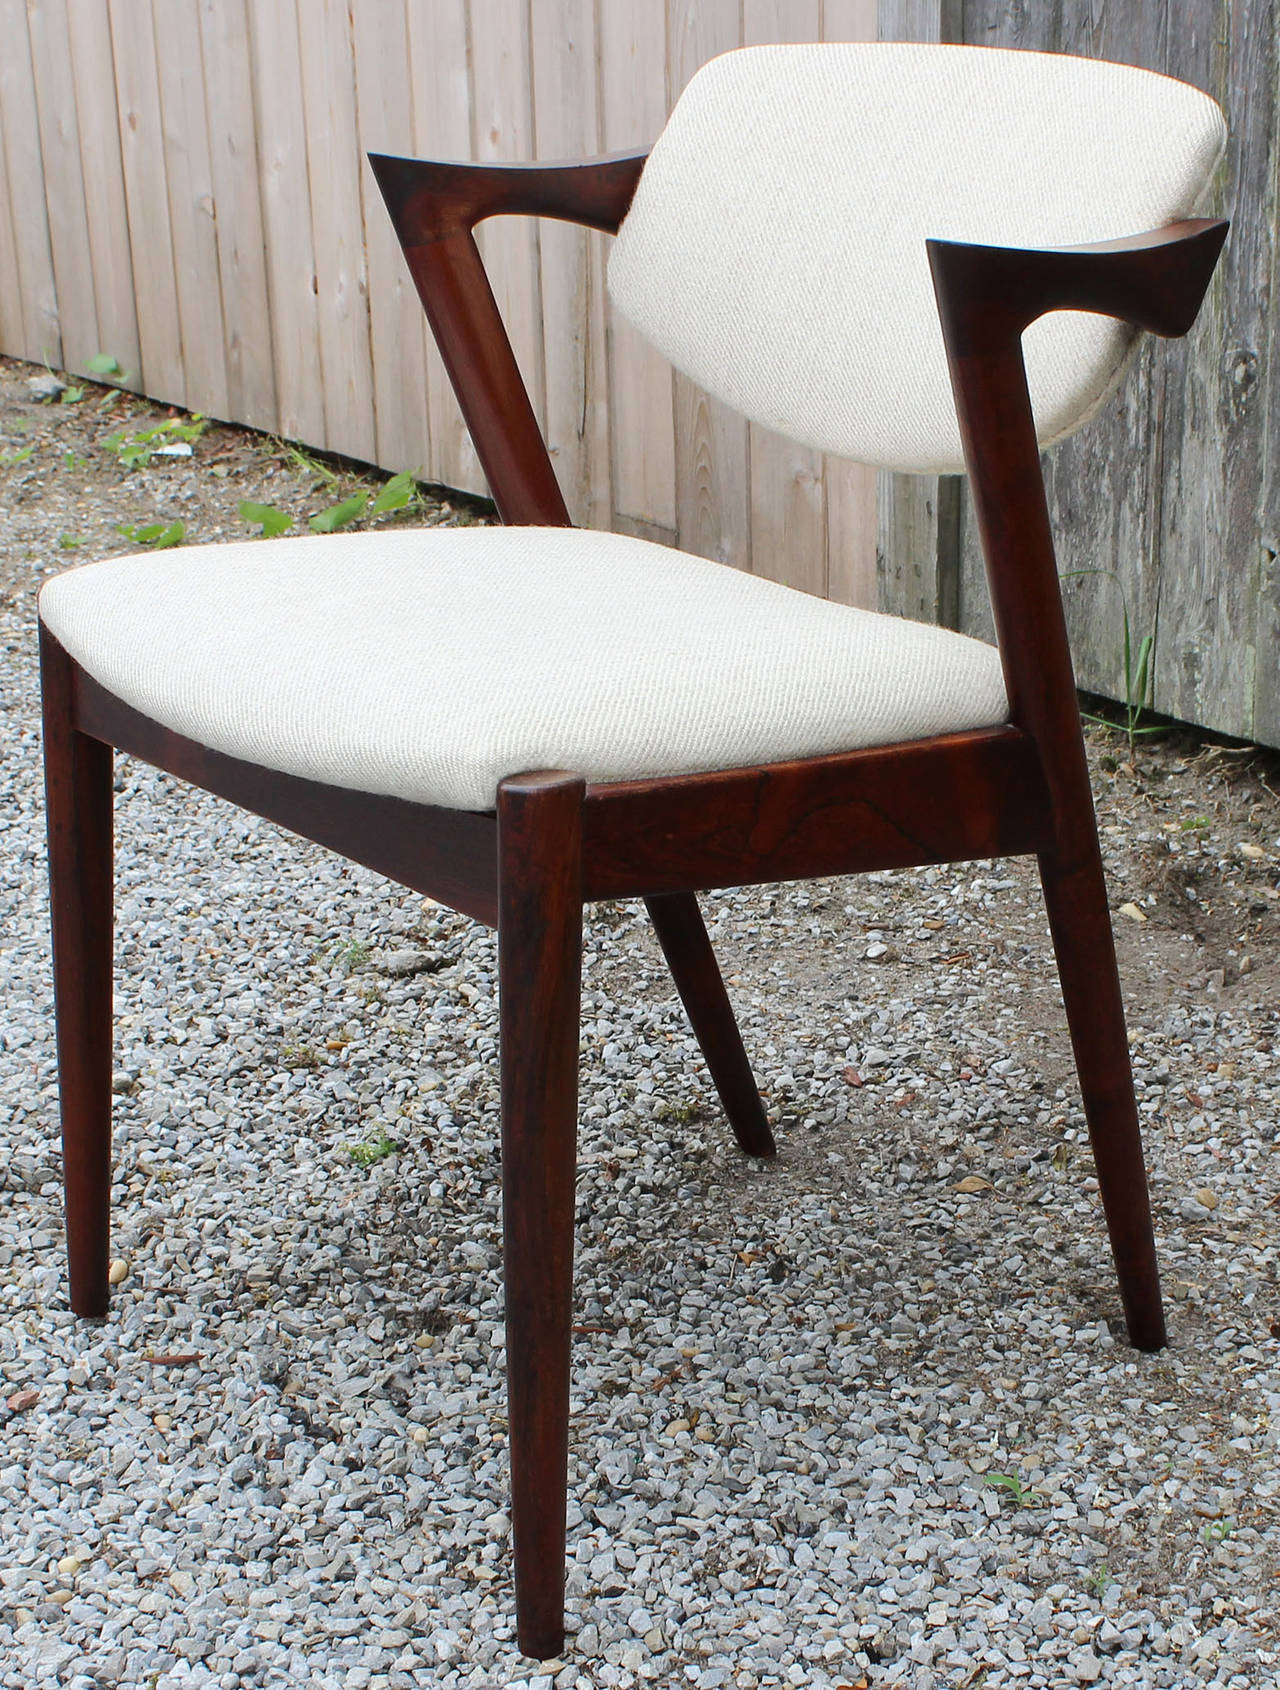 A set of six rosewood model 42 dining chairs with floating swivel backs designed by Kai Kristiansen.

Matching round, book matched rosewood dining table with two large leaves also available see pictures.